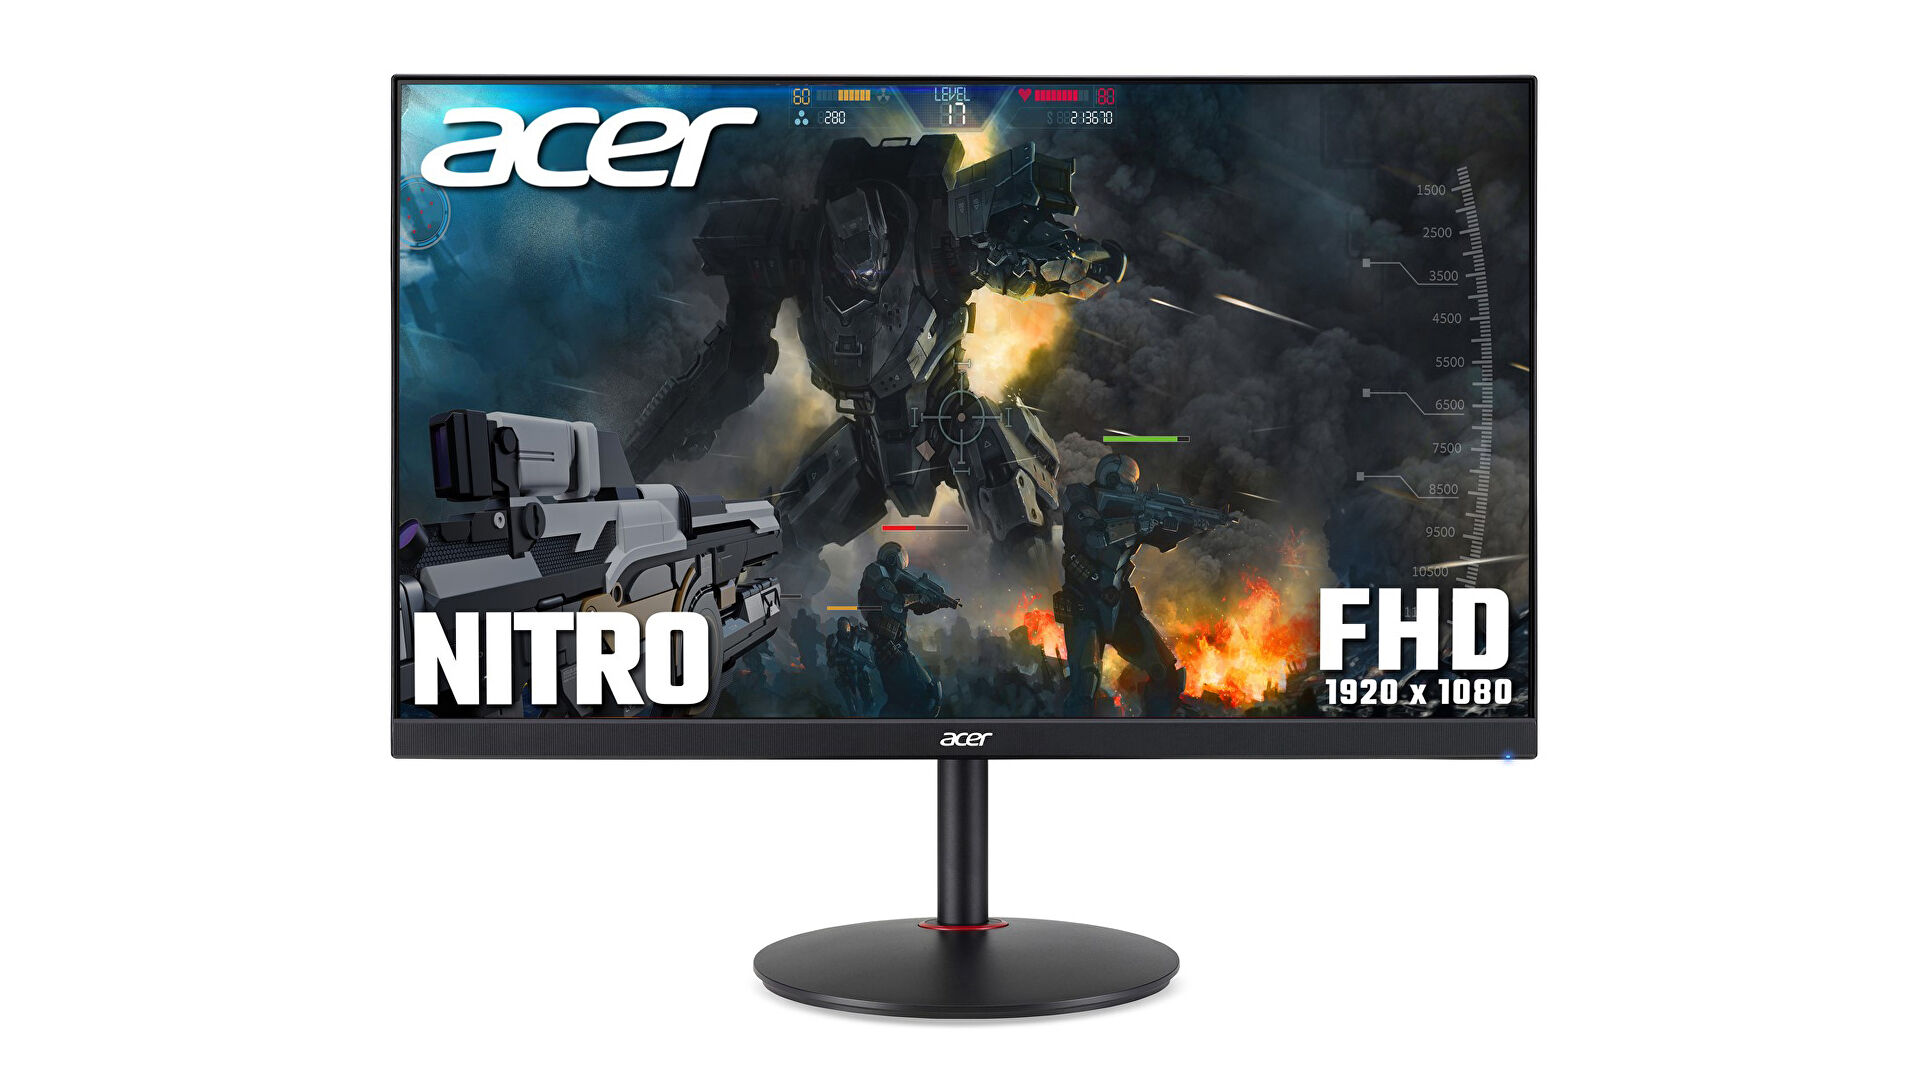 This 280Hz Acer Nitro monitor is down to £180 at Laptops Direct in the UK